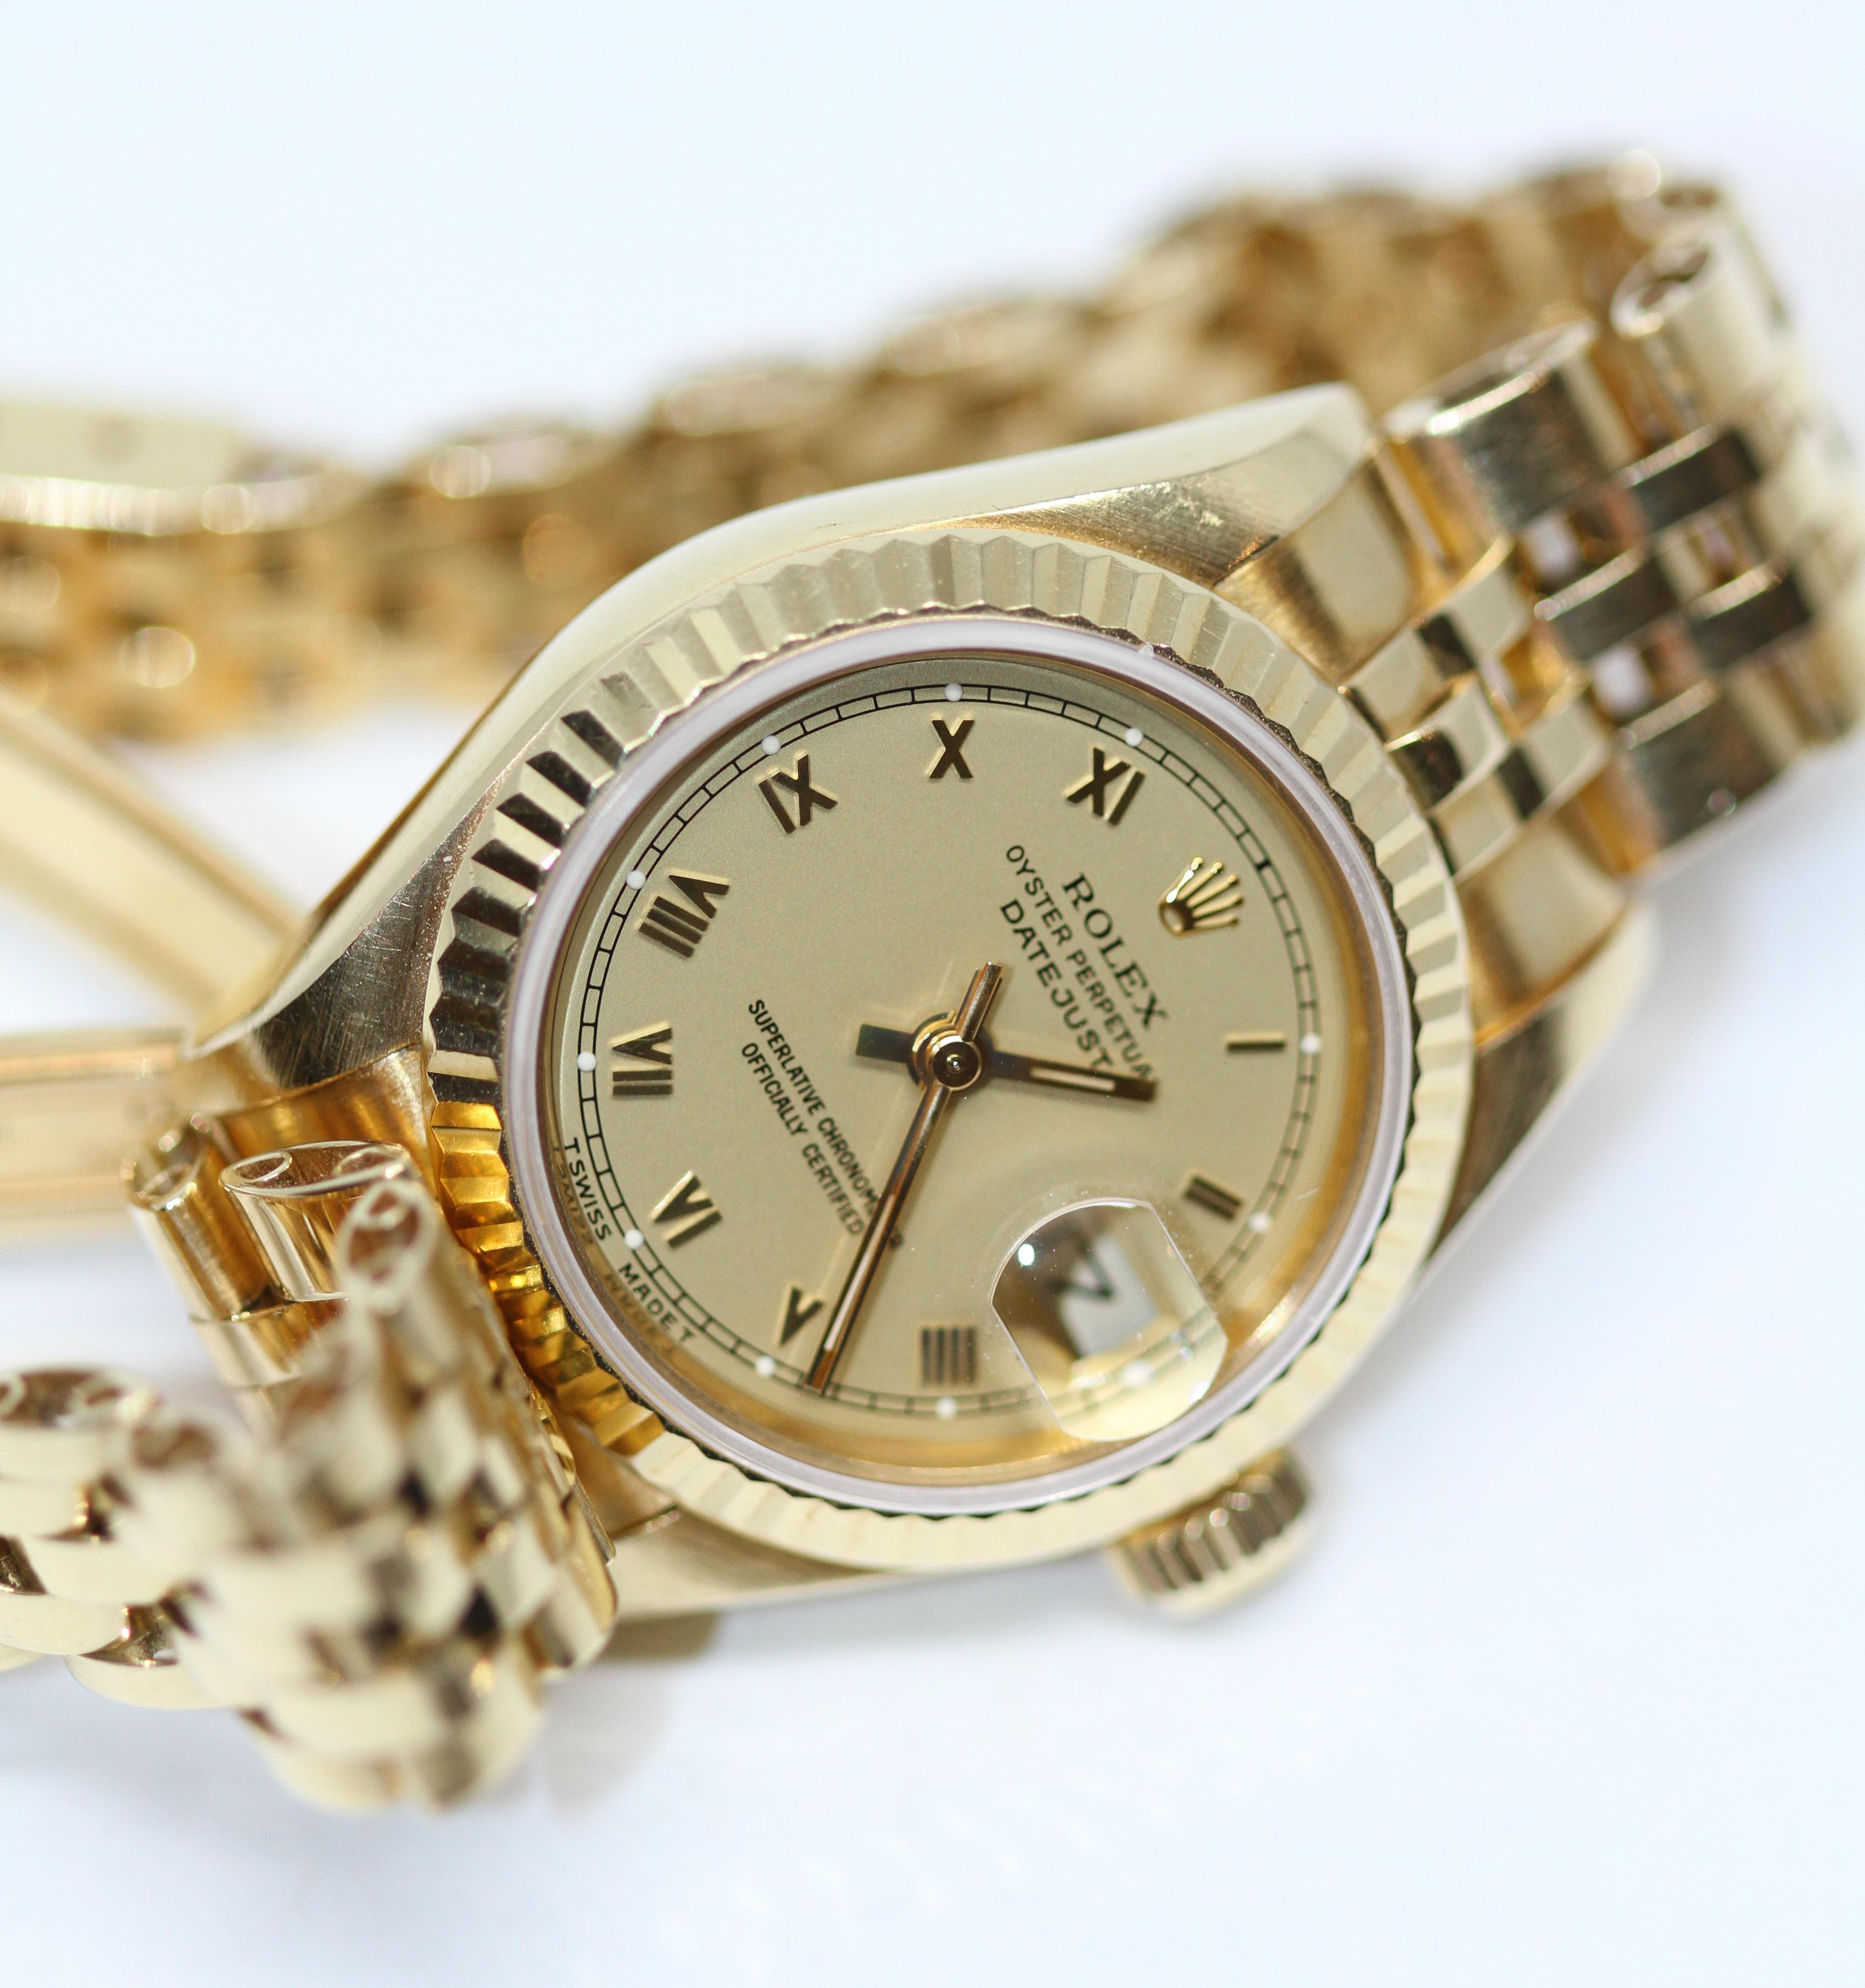 Rolex Oyster Perpetual Date Just Lady 18K Gold Watch 3